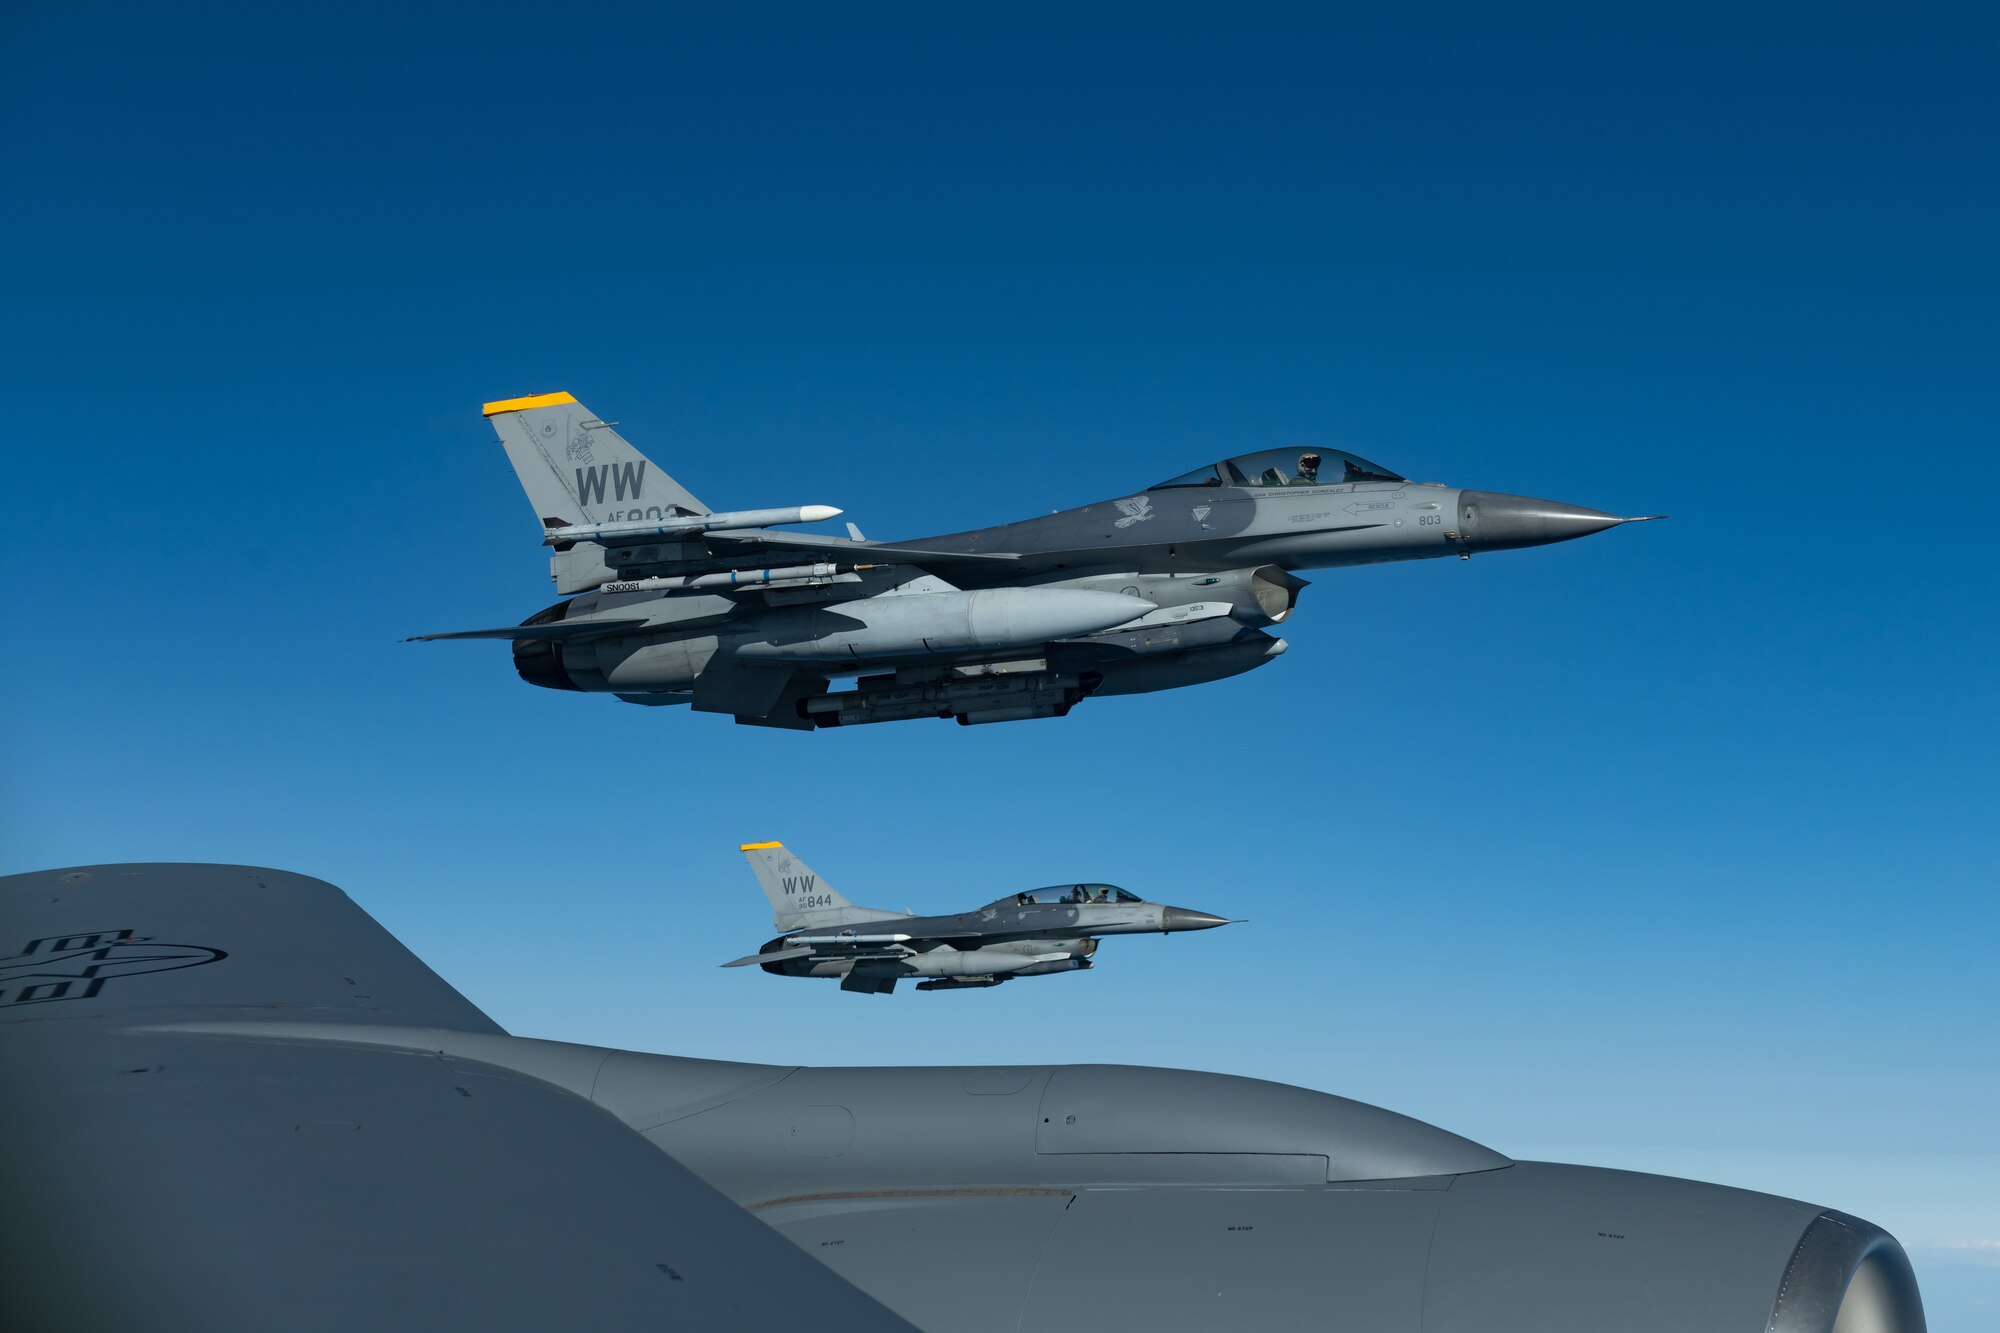 Two F-16CM Fighting Falcons from the 35th Fighter Wing, Misawa Air Base, fly during a routine training exercise off the coast of Japan, May 8, 2019. The 35th FW provides worldwide deployable forces with a sustained forward presence focused on maintaining a free-and-open Indo-Pacific. (U.S. Air Force photo by Airman 1st Class Matthew Seefeldt)